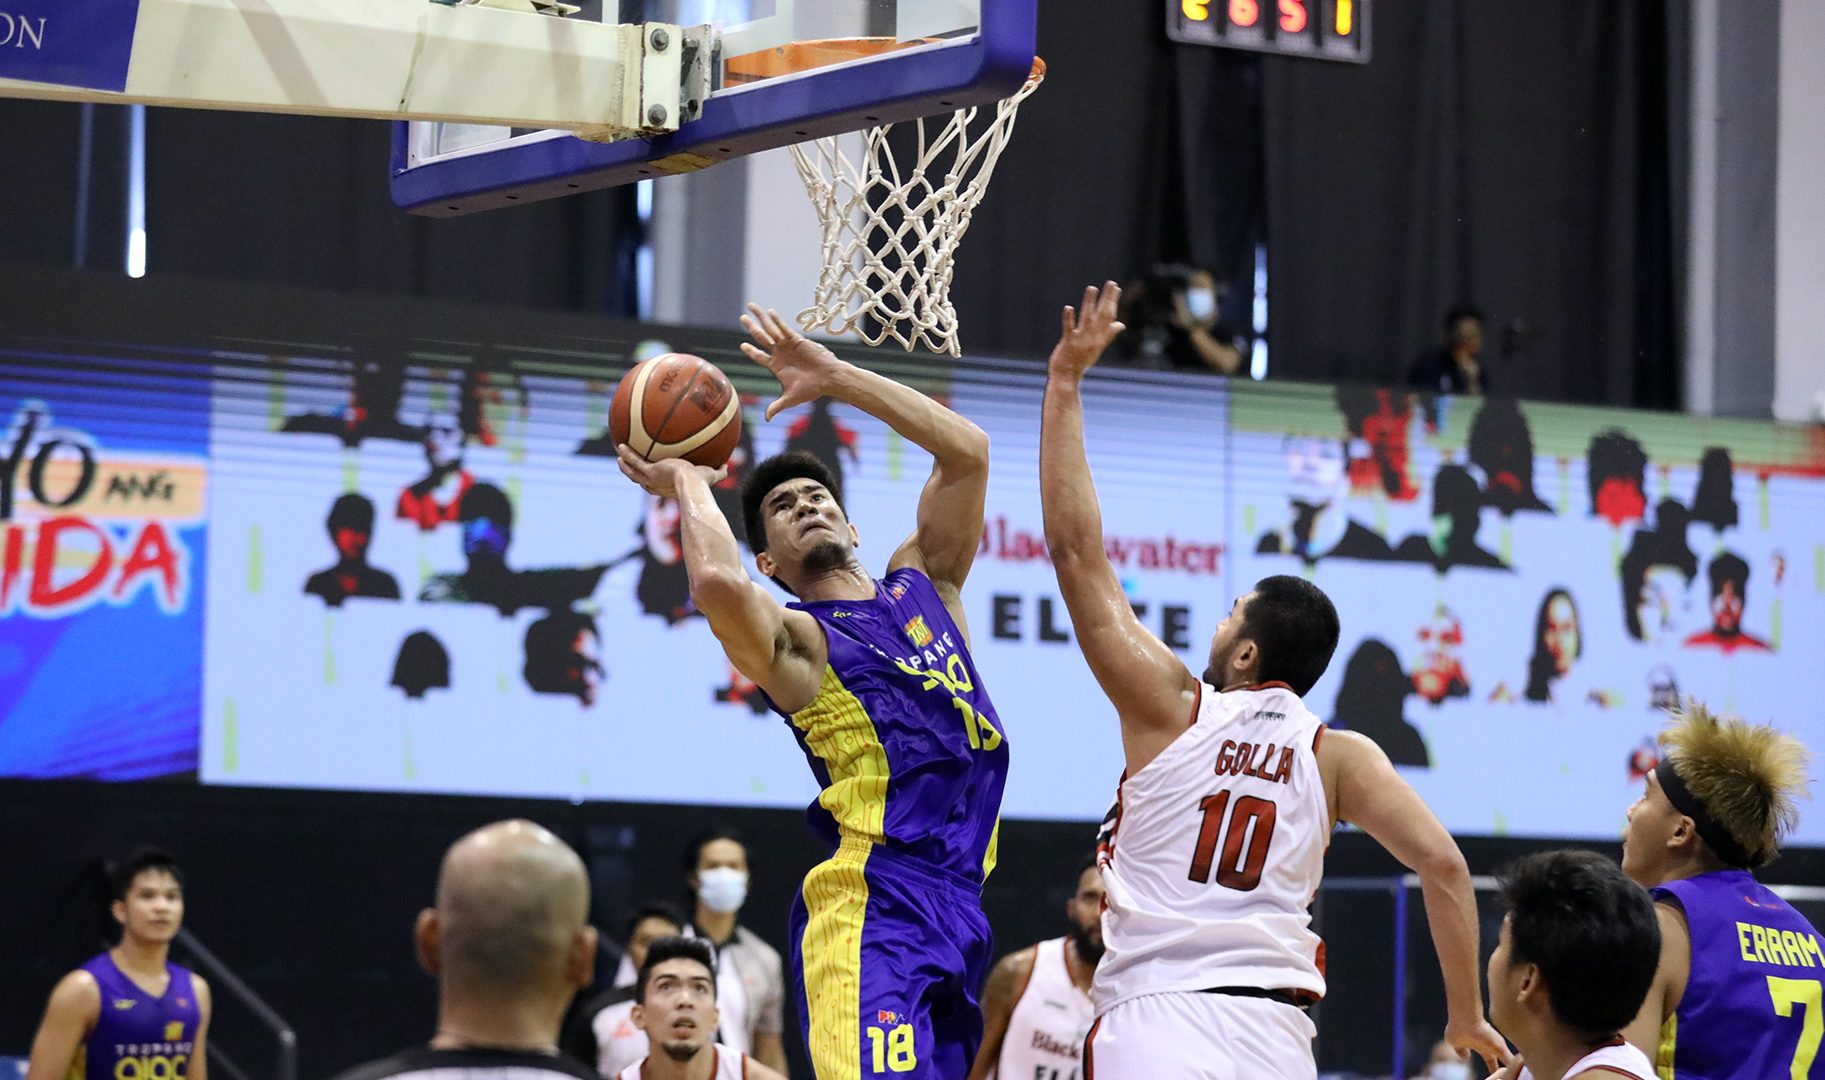 PBA postpones another game after COVID-19 scare